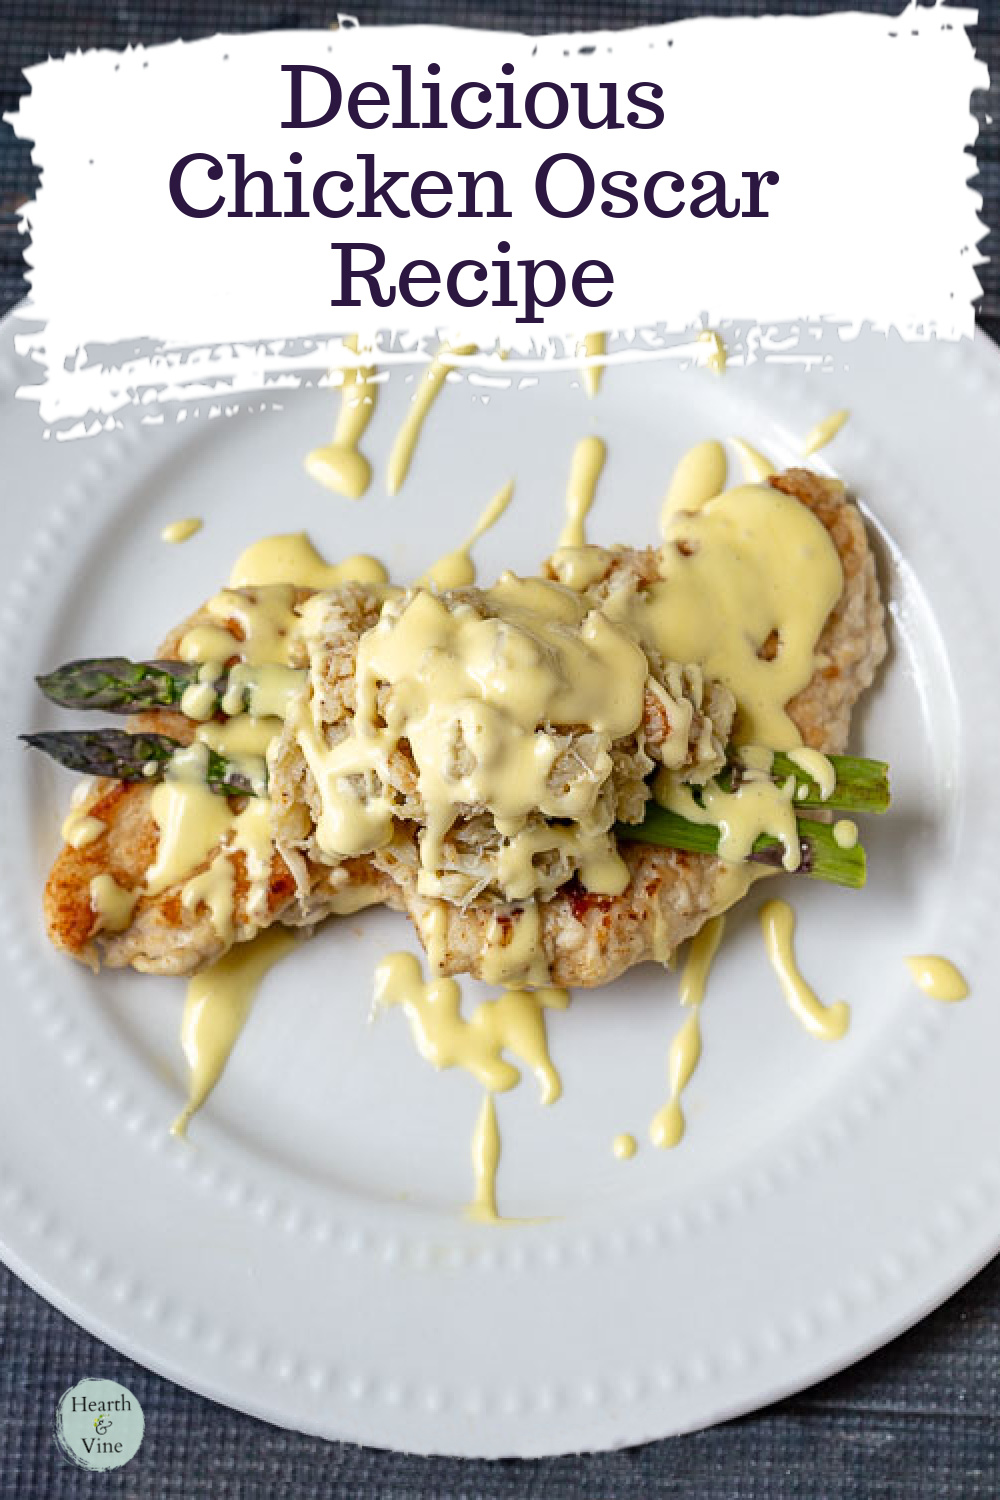 Chicken oscar. Breaded chicken breasts topped with asparagus, crab meat and hollandaise sauce.